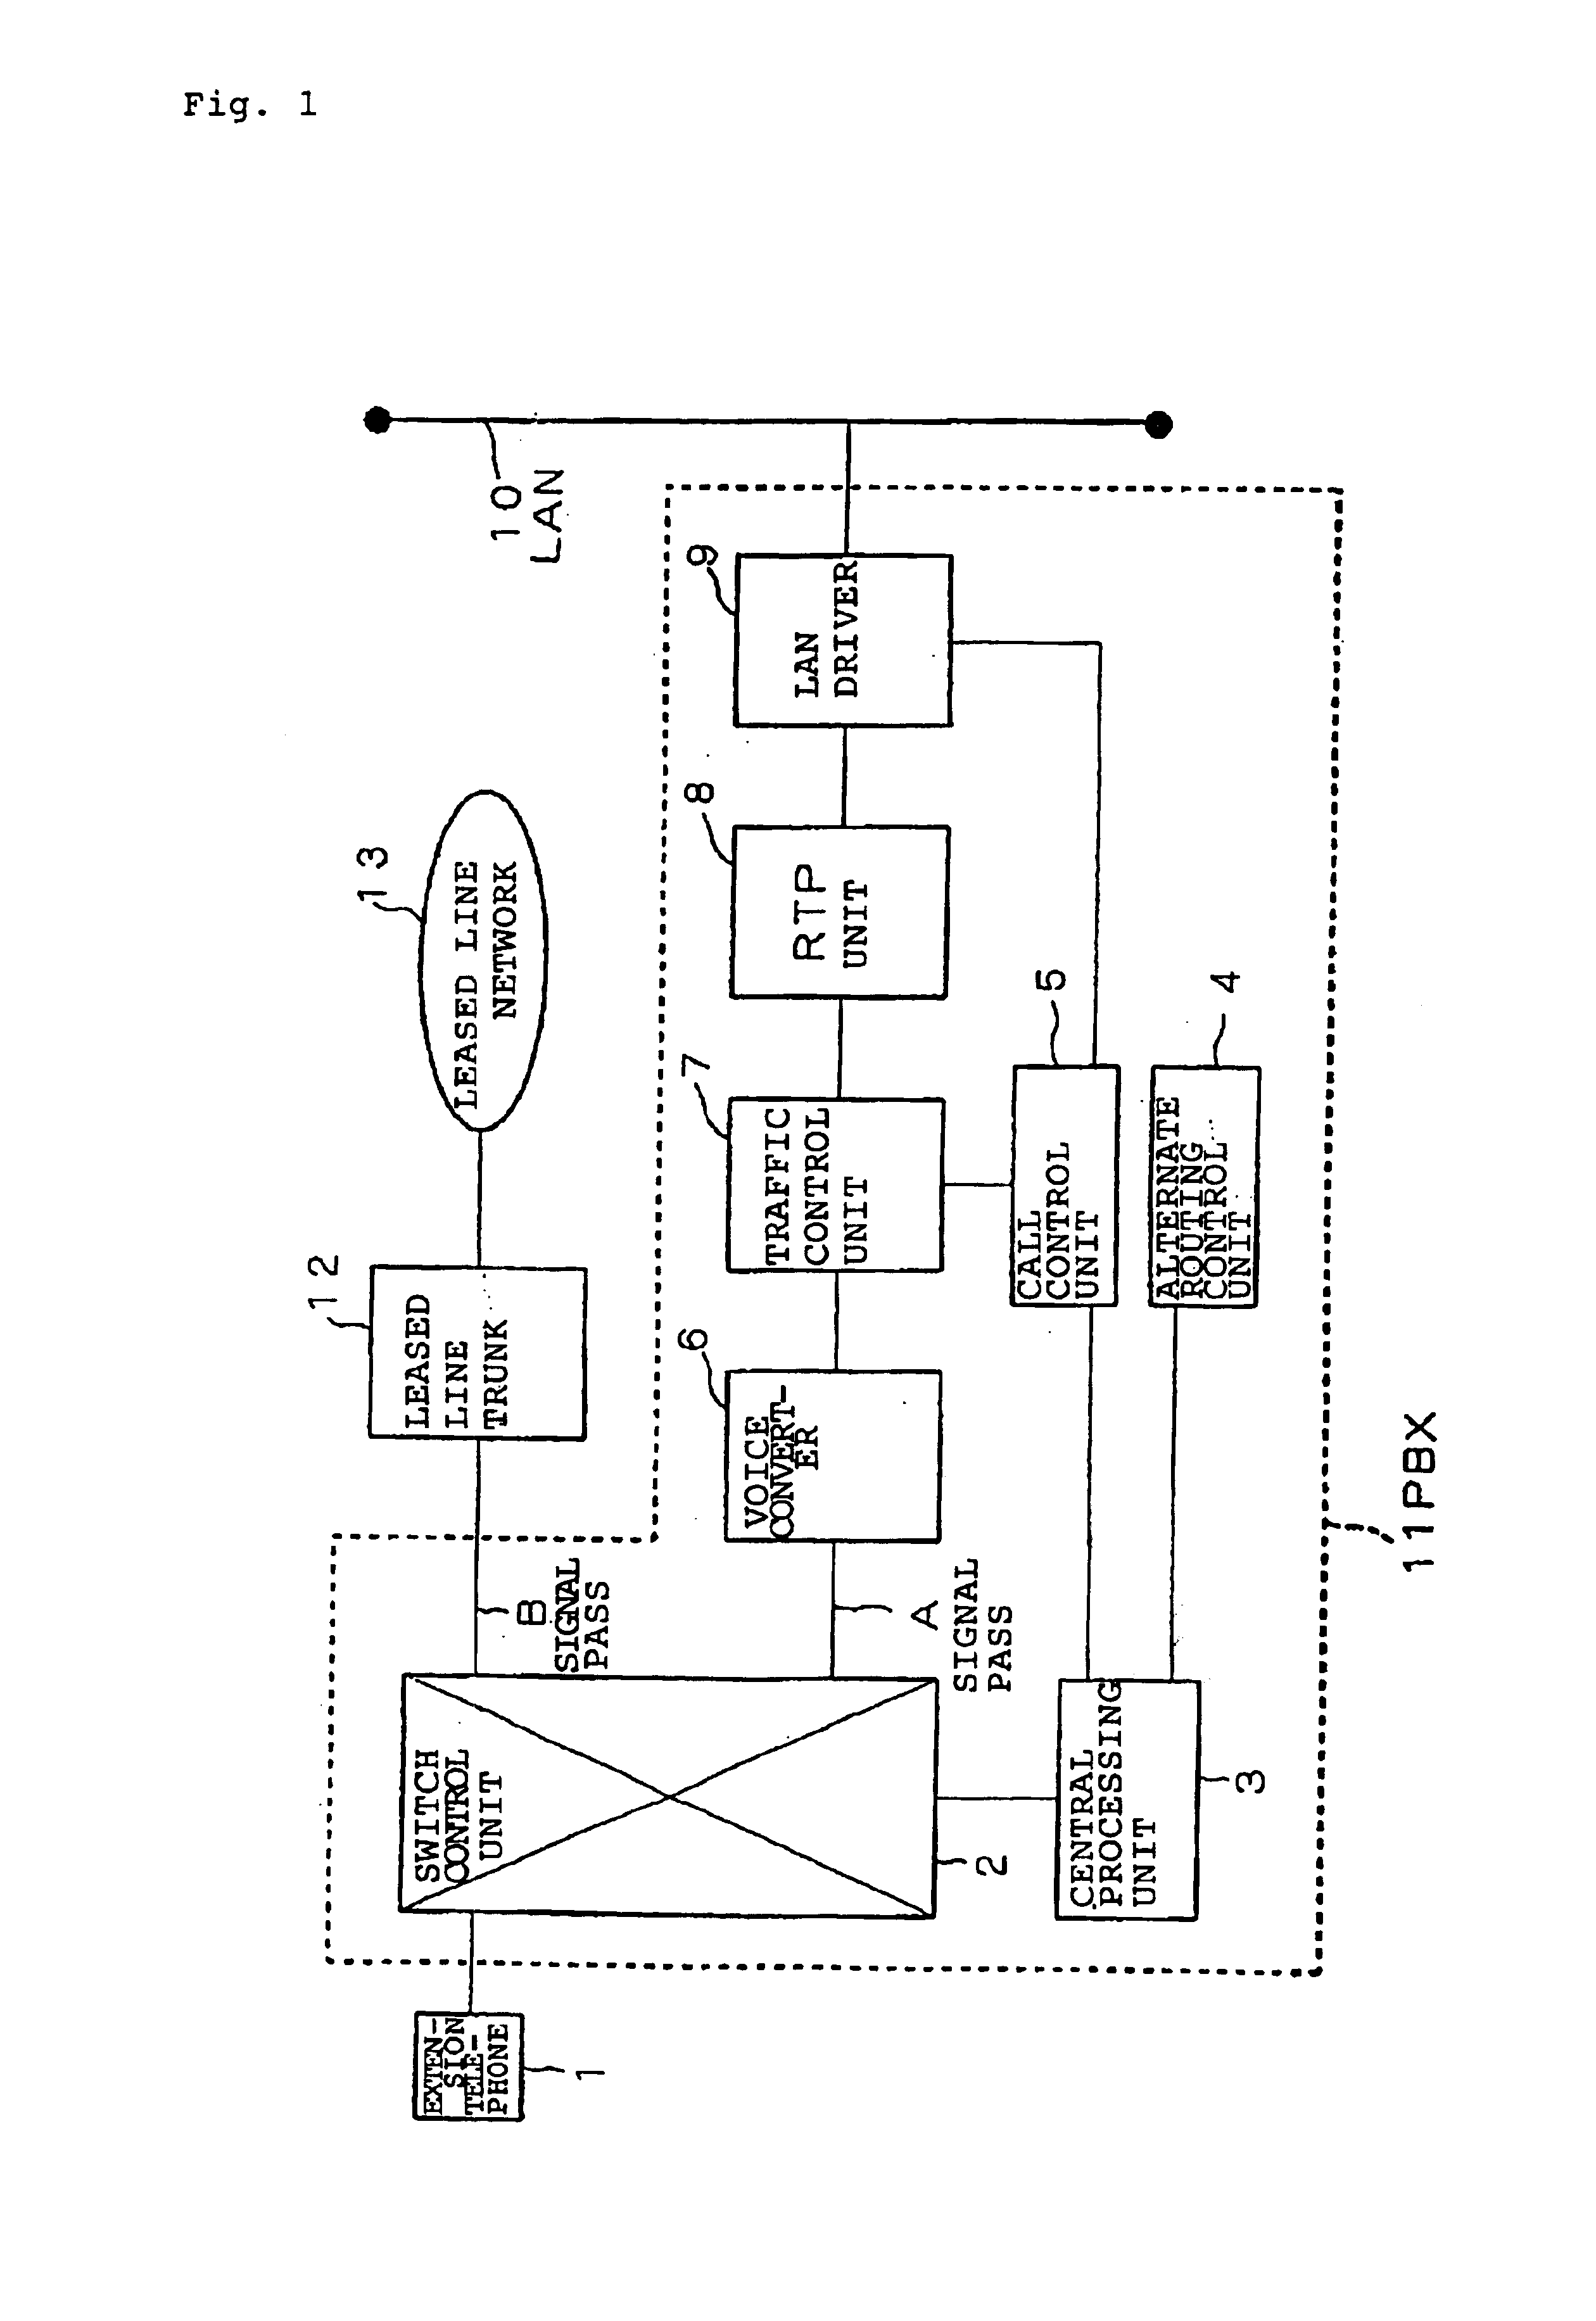 Internet protocol network alternate routing system